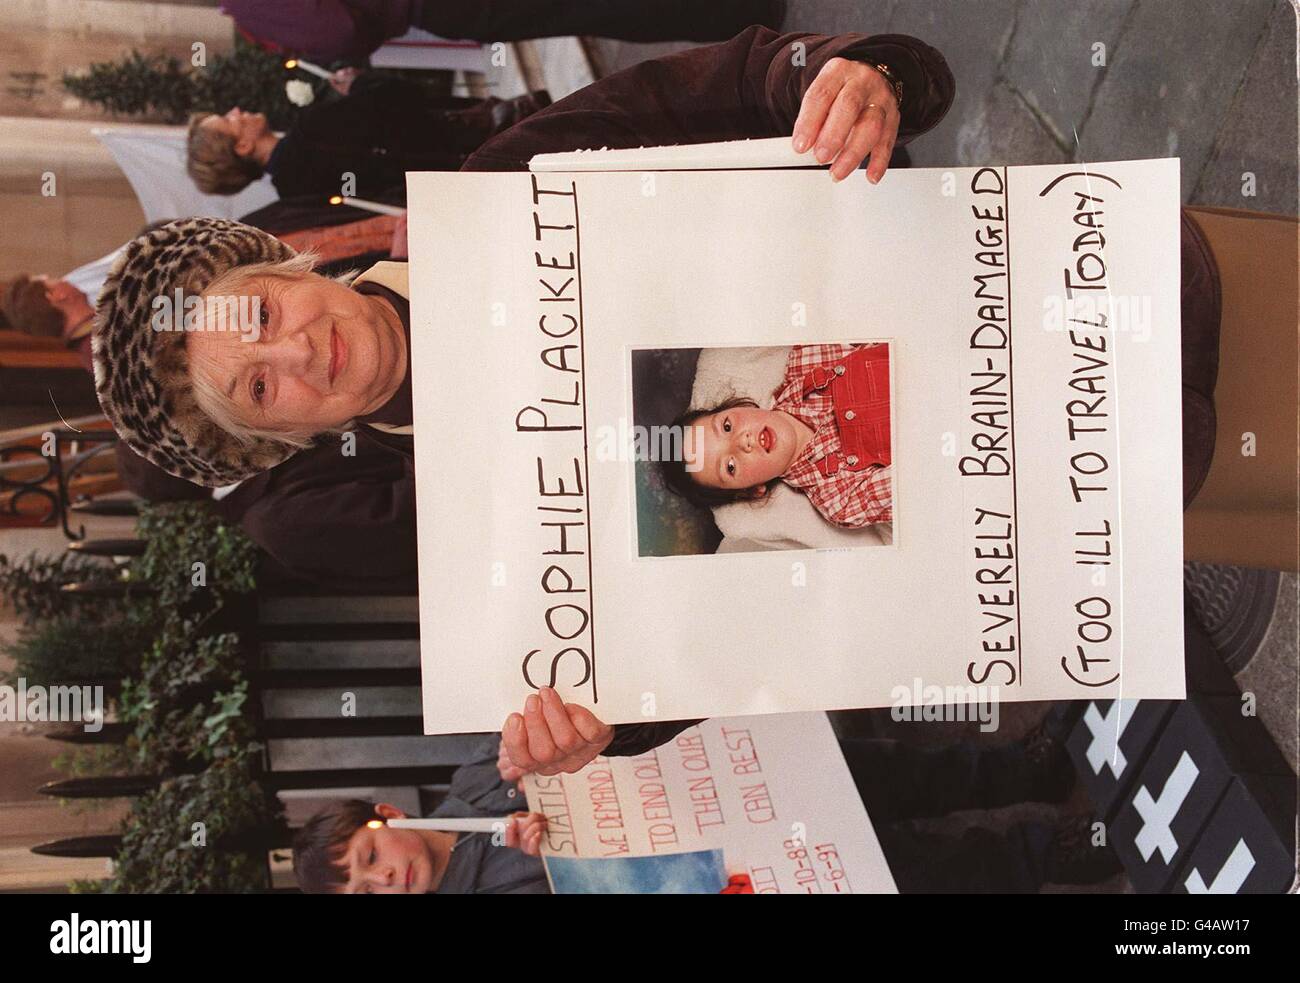 Dilly Foster, Grandmother of Sophie Plackett, from Bradnigh, Devon, one of dozens of children, who died or were brain damaged following heart surgery at Bristol Royal Infirmary, outside the General Medical Council in London today (Wednesday) to demand a public inquiry into her case. The demonstration was staged to coincide with the first day of evidence by James Wisheart, a senior cardiac consultant who is accused of serious professional misconduct at the hospital. See PA story GMC Surgeon. Photo Michael Stephens/PA Stock Photo